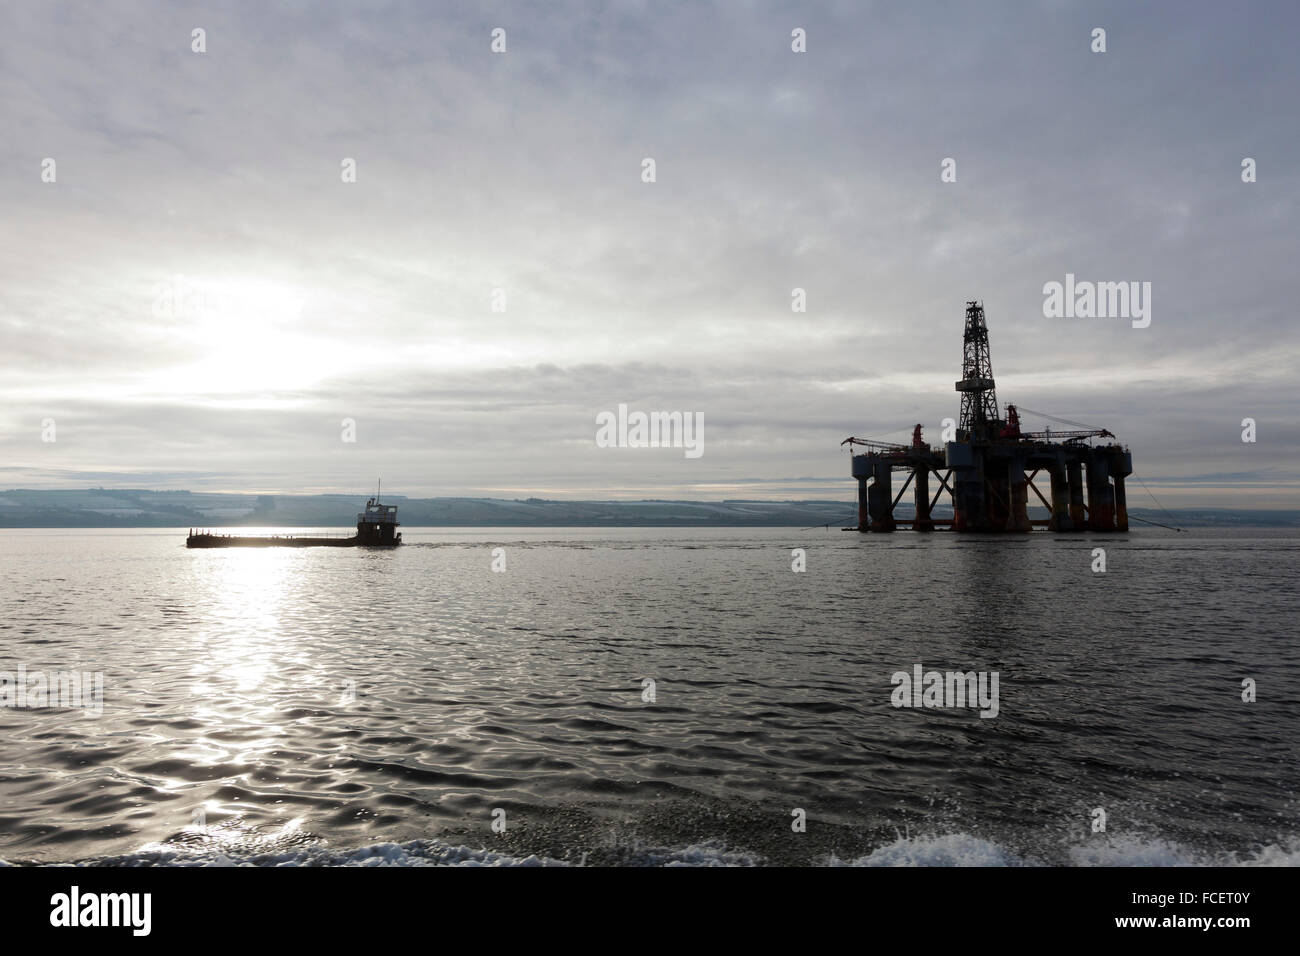 Oil rigs in the Cromarty Firth, Scotland Stock Photo